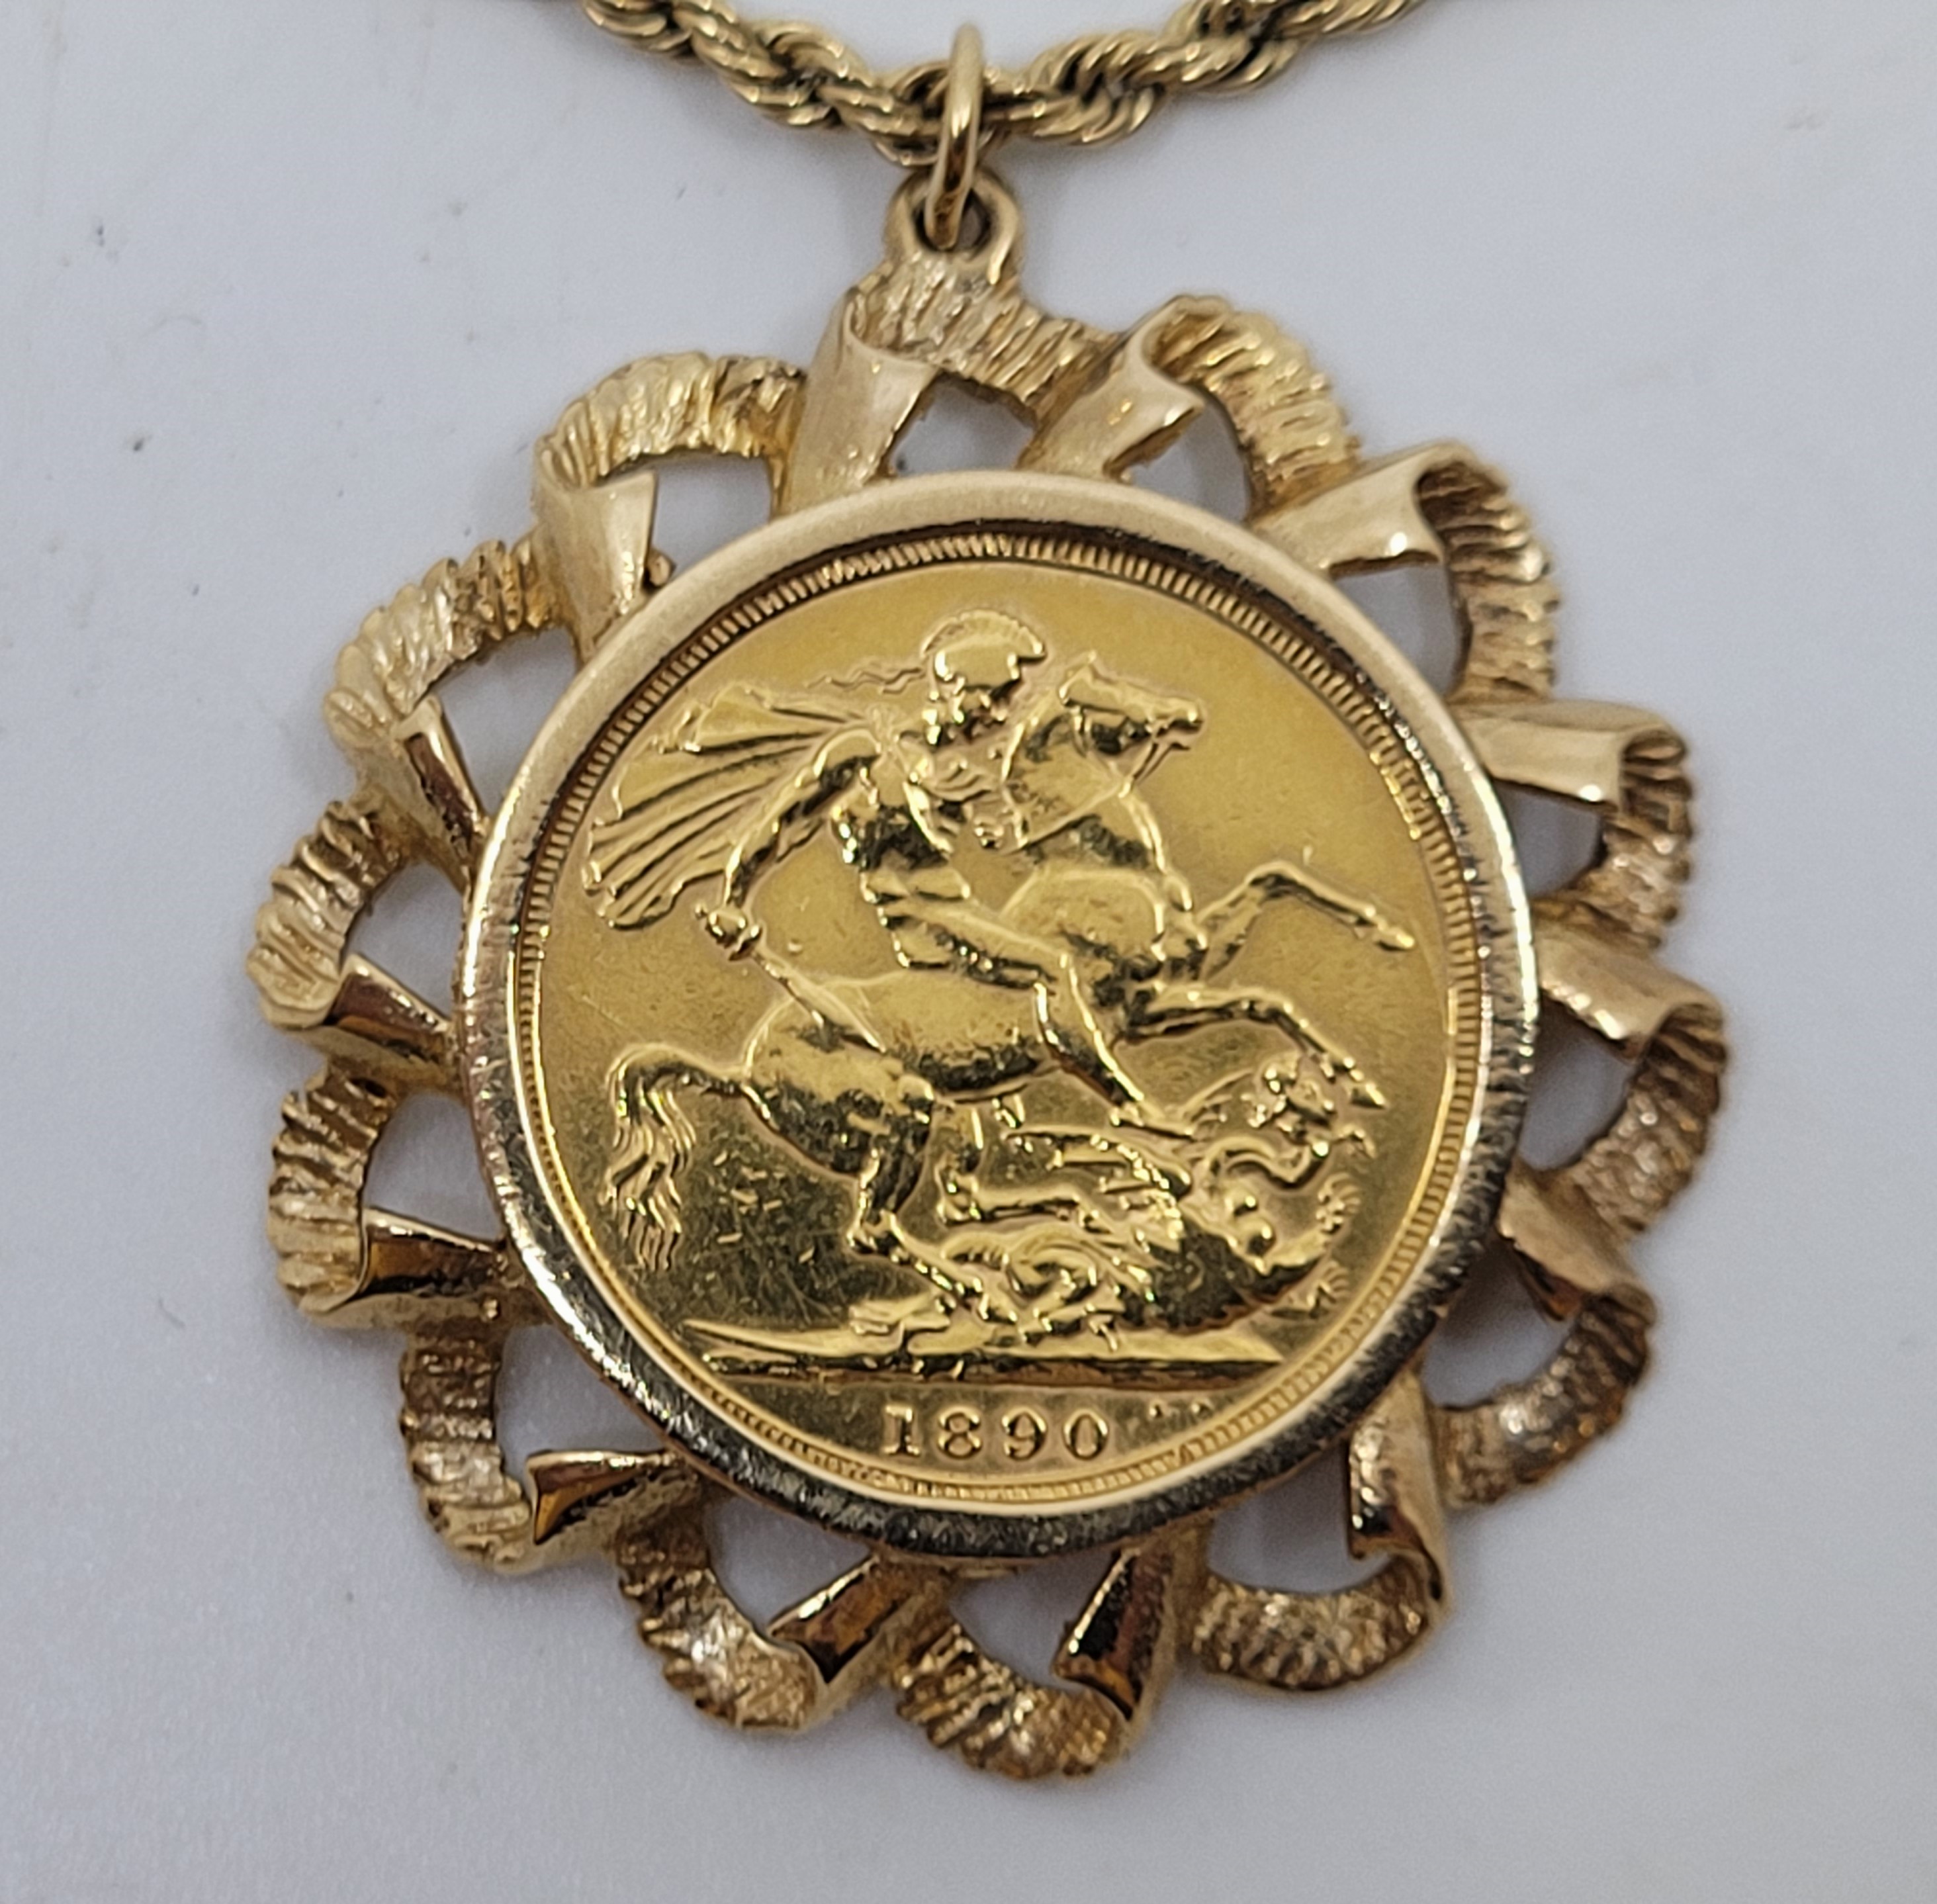 A Victoria 1890 "jubilee bust" gold sovereign coin, London mint, in 9ct. gold pendant mount, - Image 2 of 3